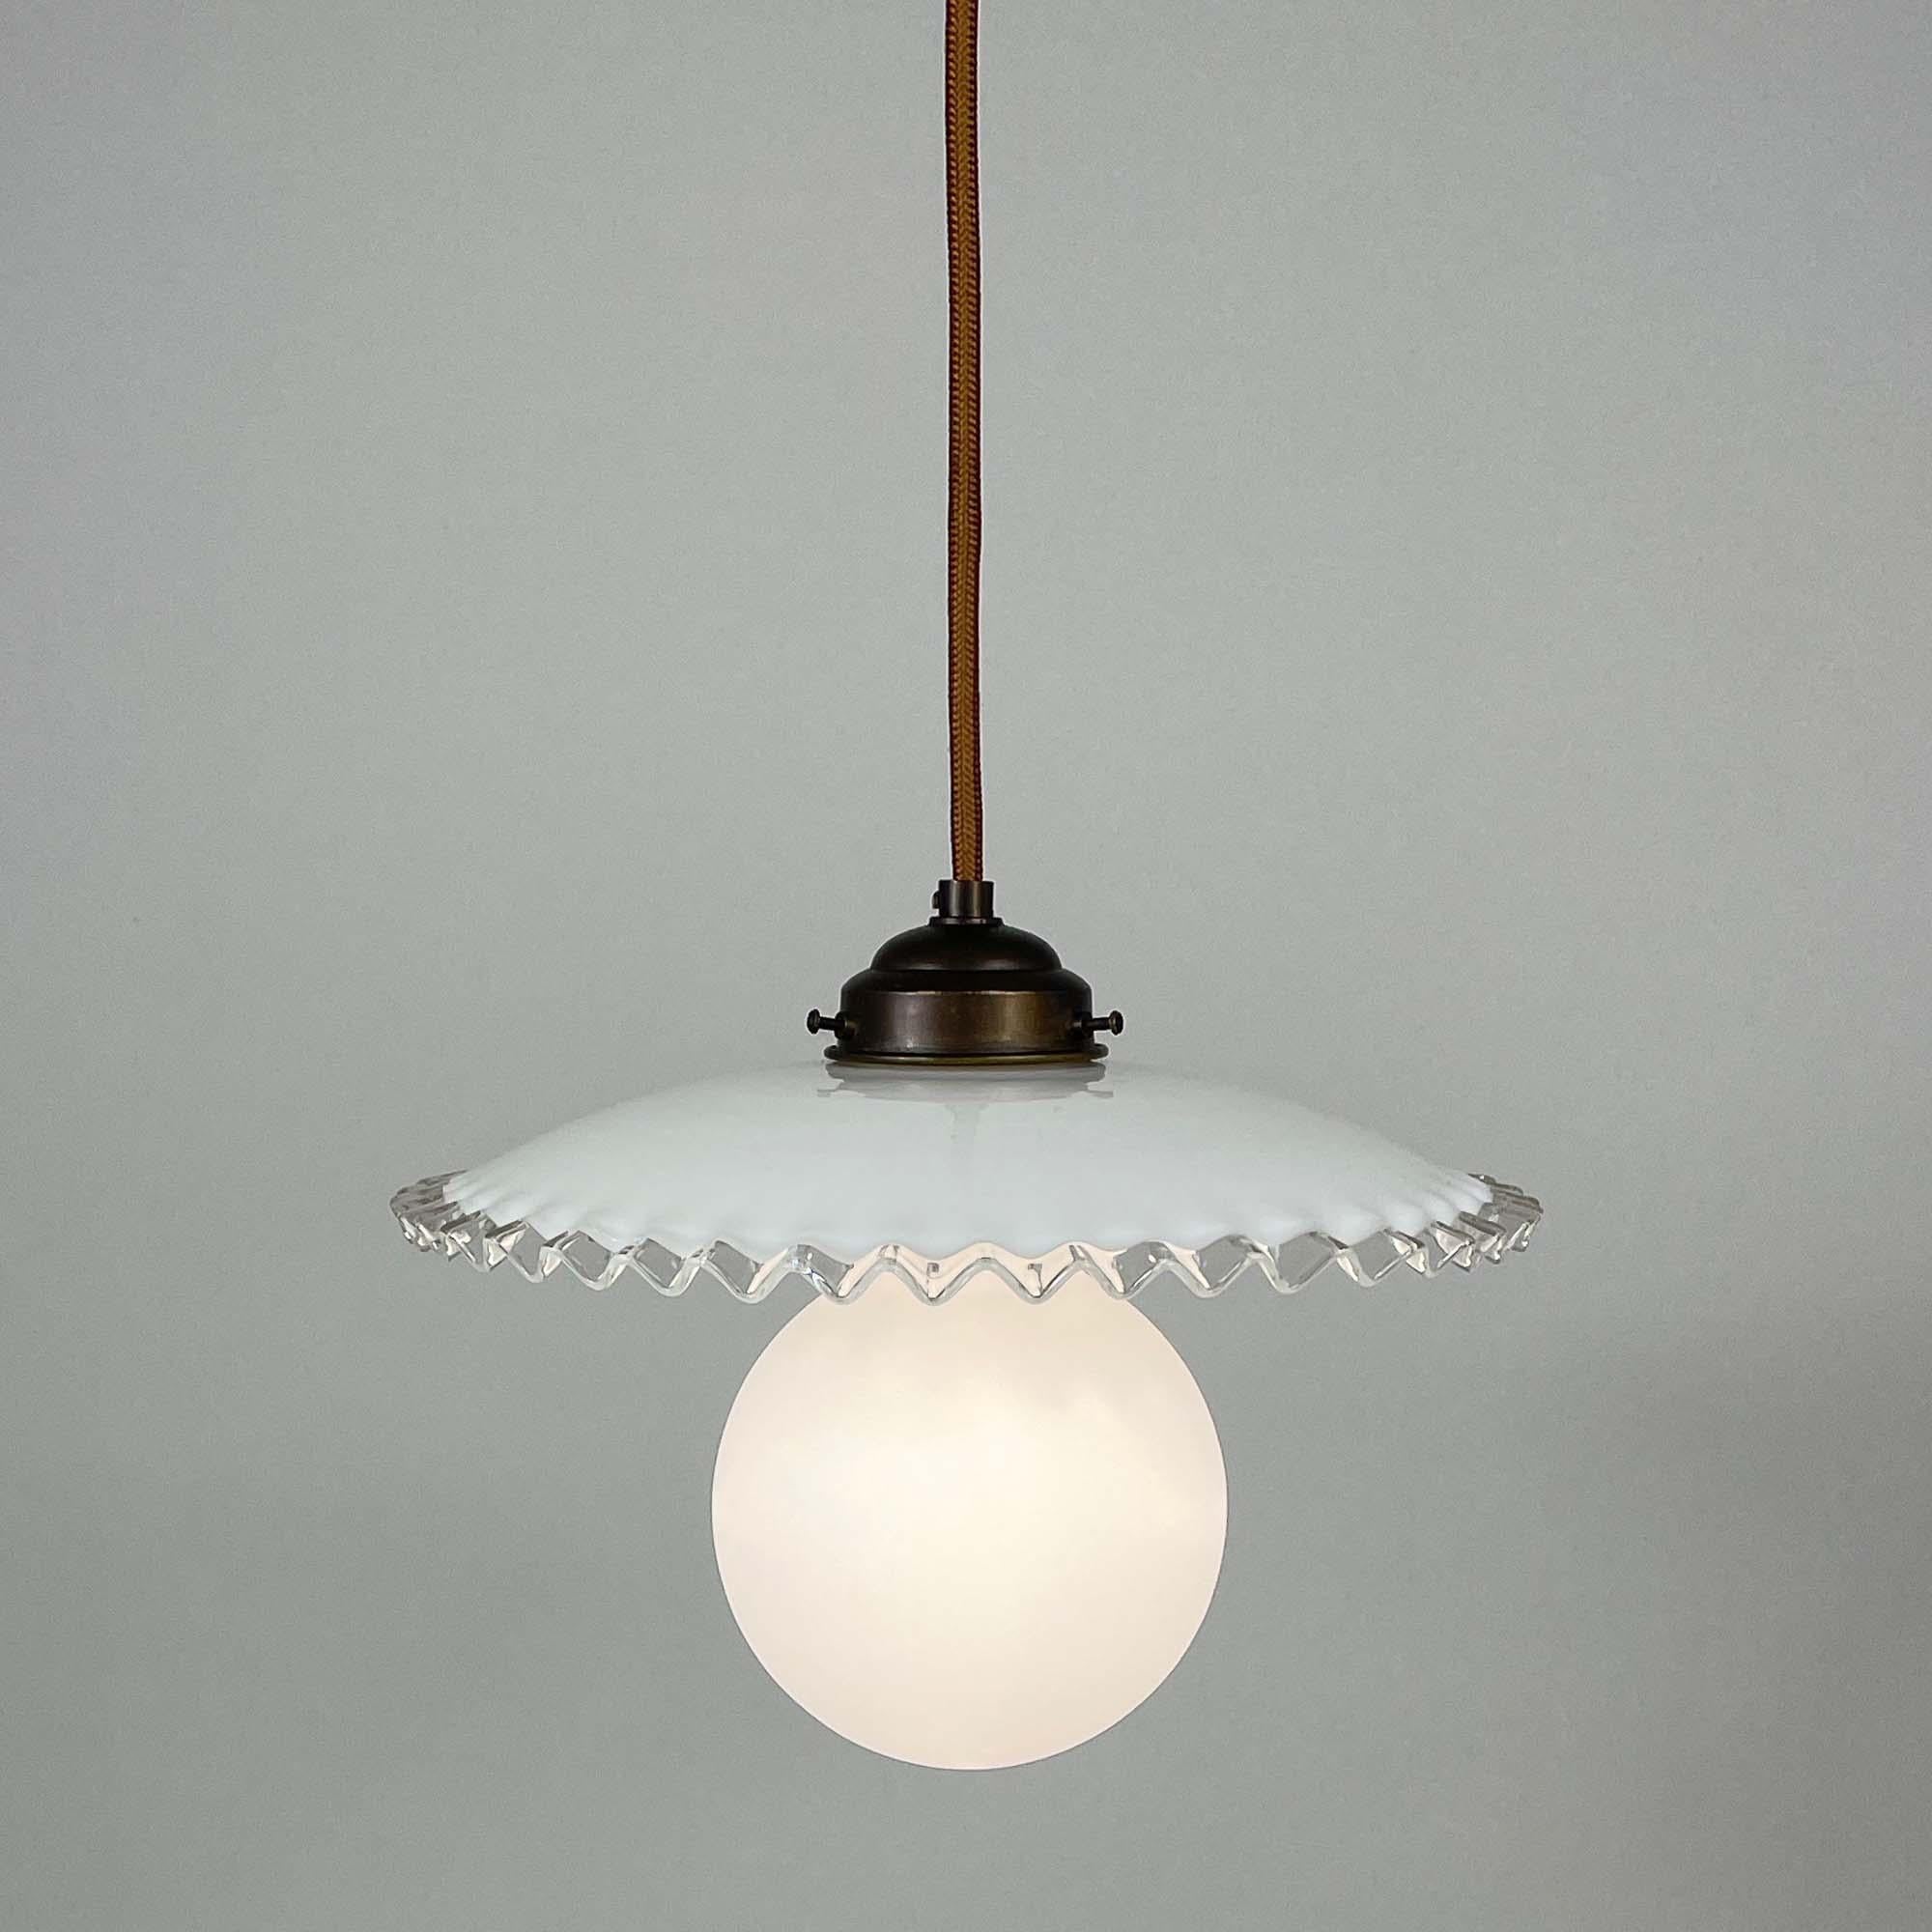 Mid-Century Modern Midcentury French Opaline Glass Pendant Light, 1950s For Sale